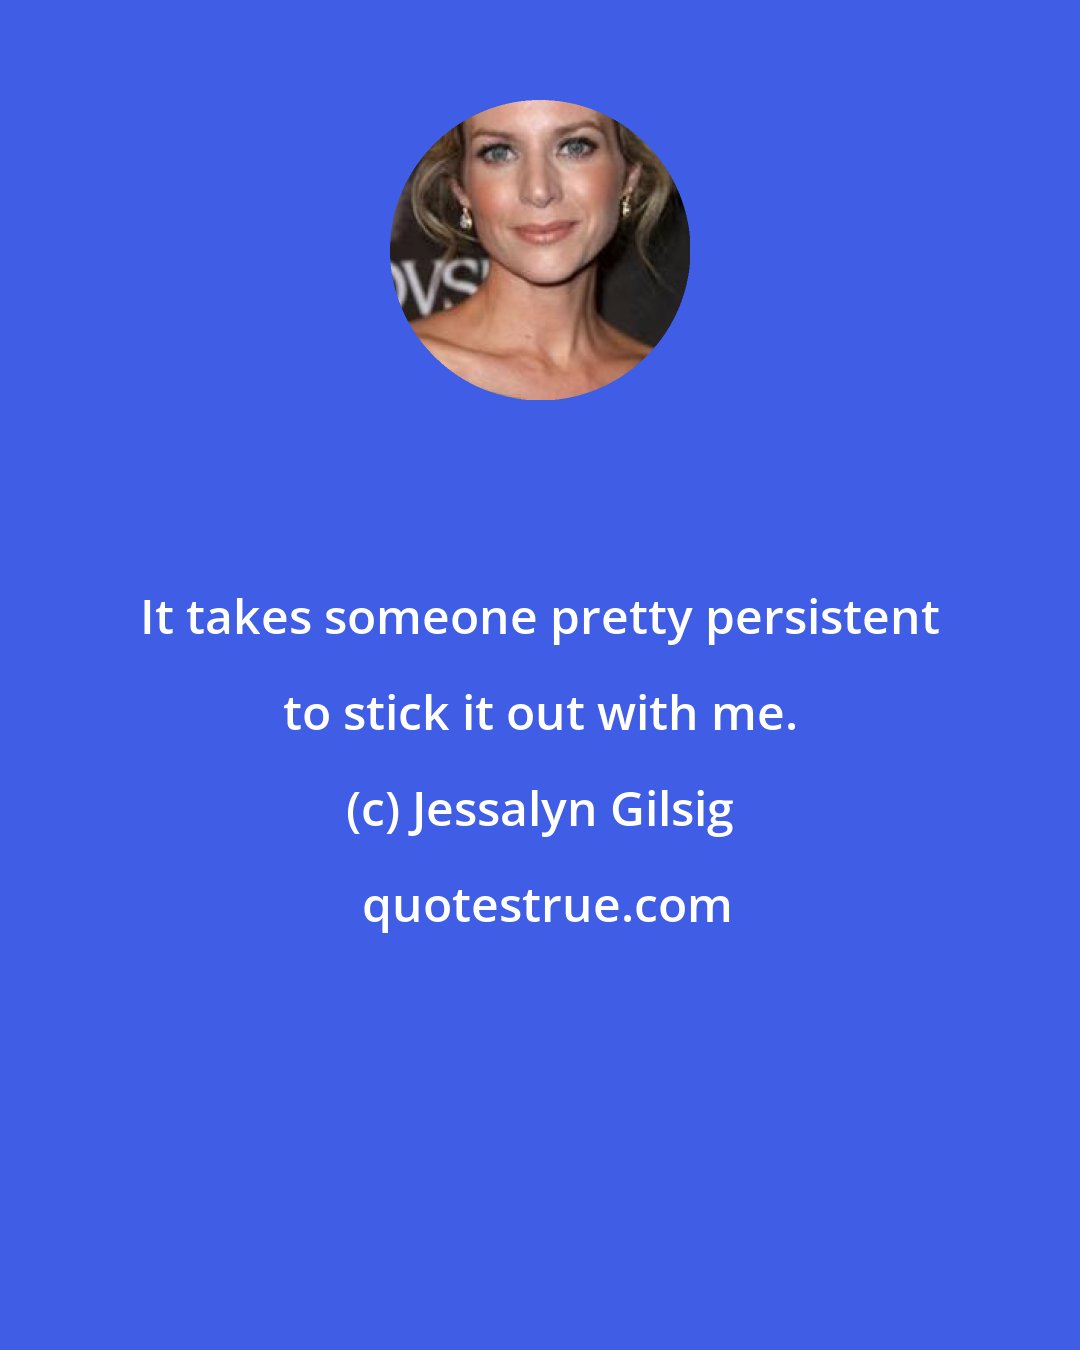 Jessalyn Gilsig: It takes someone pretty persistent to stick it out with me.